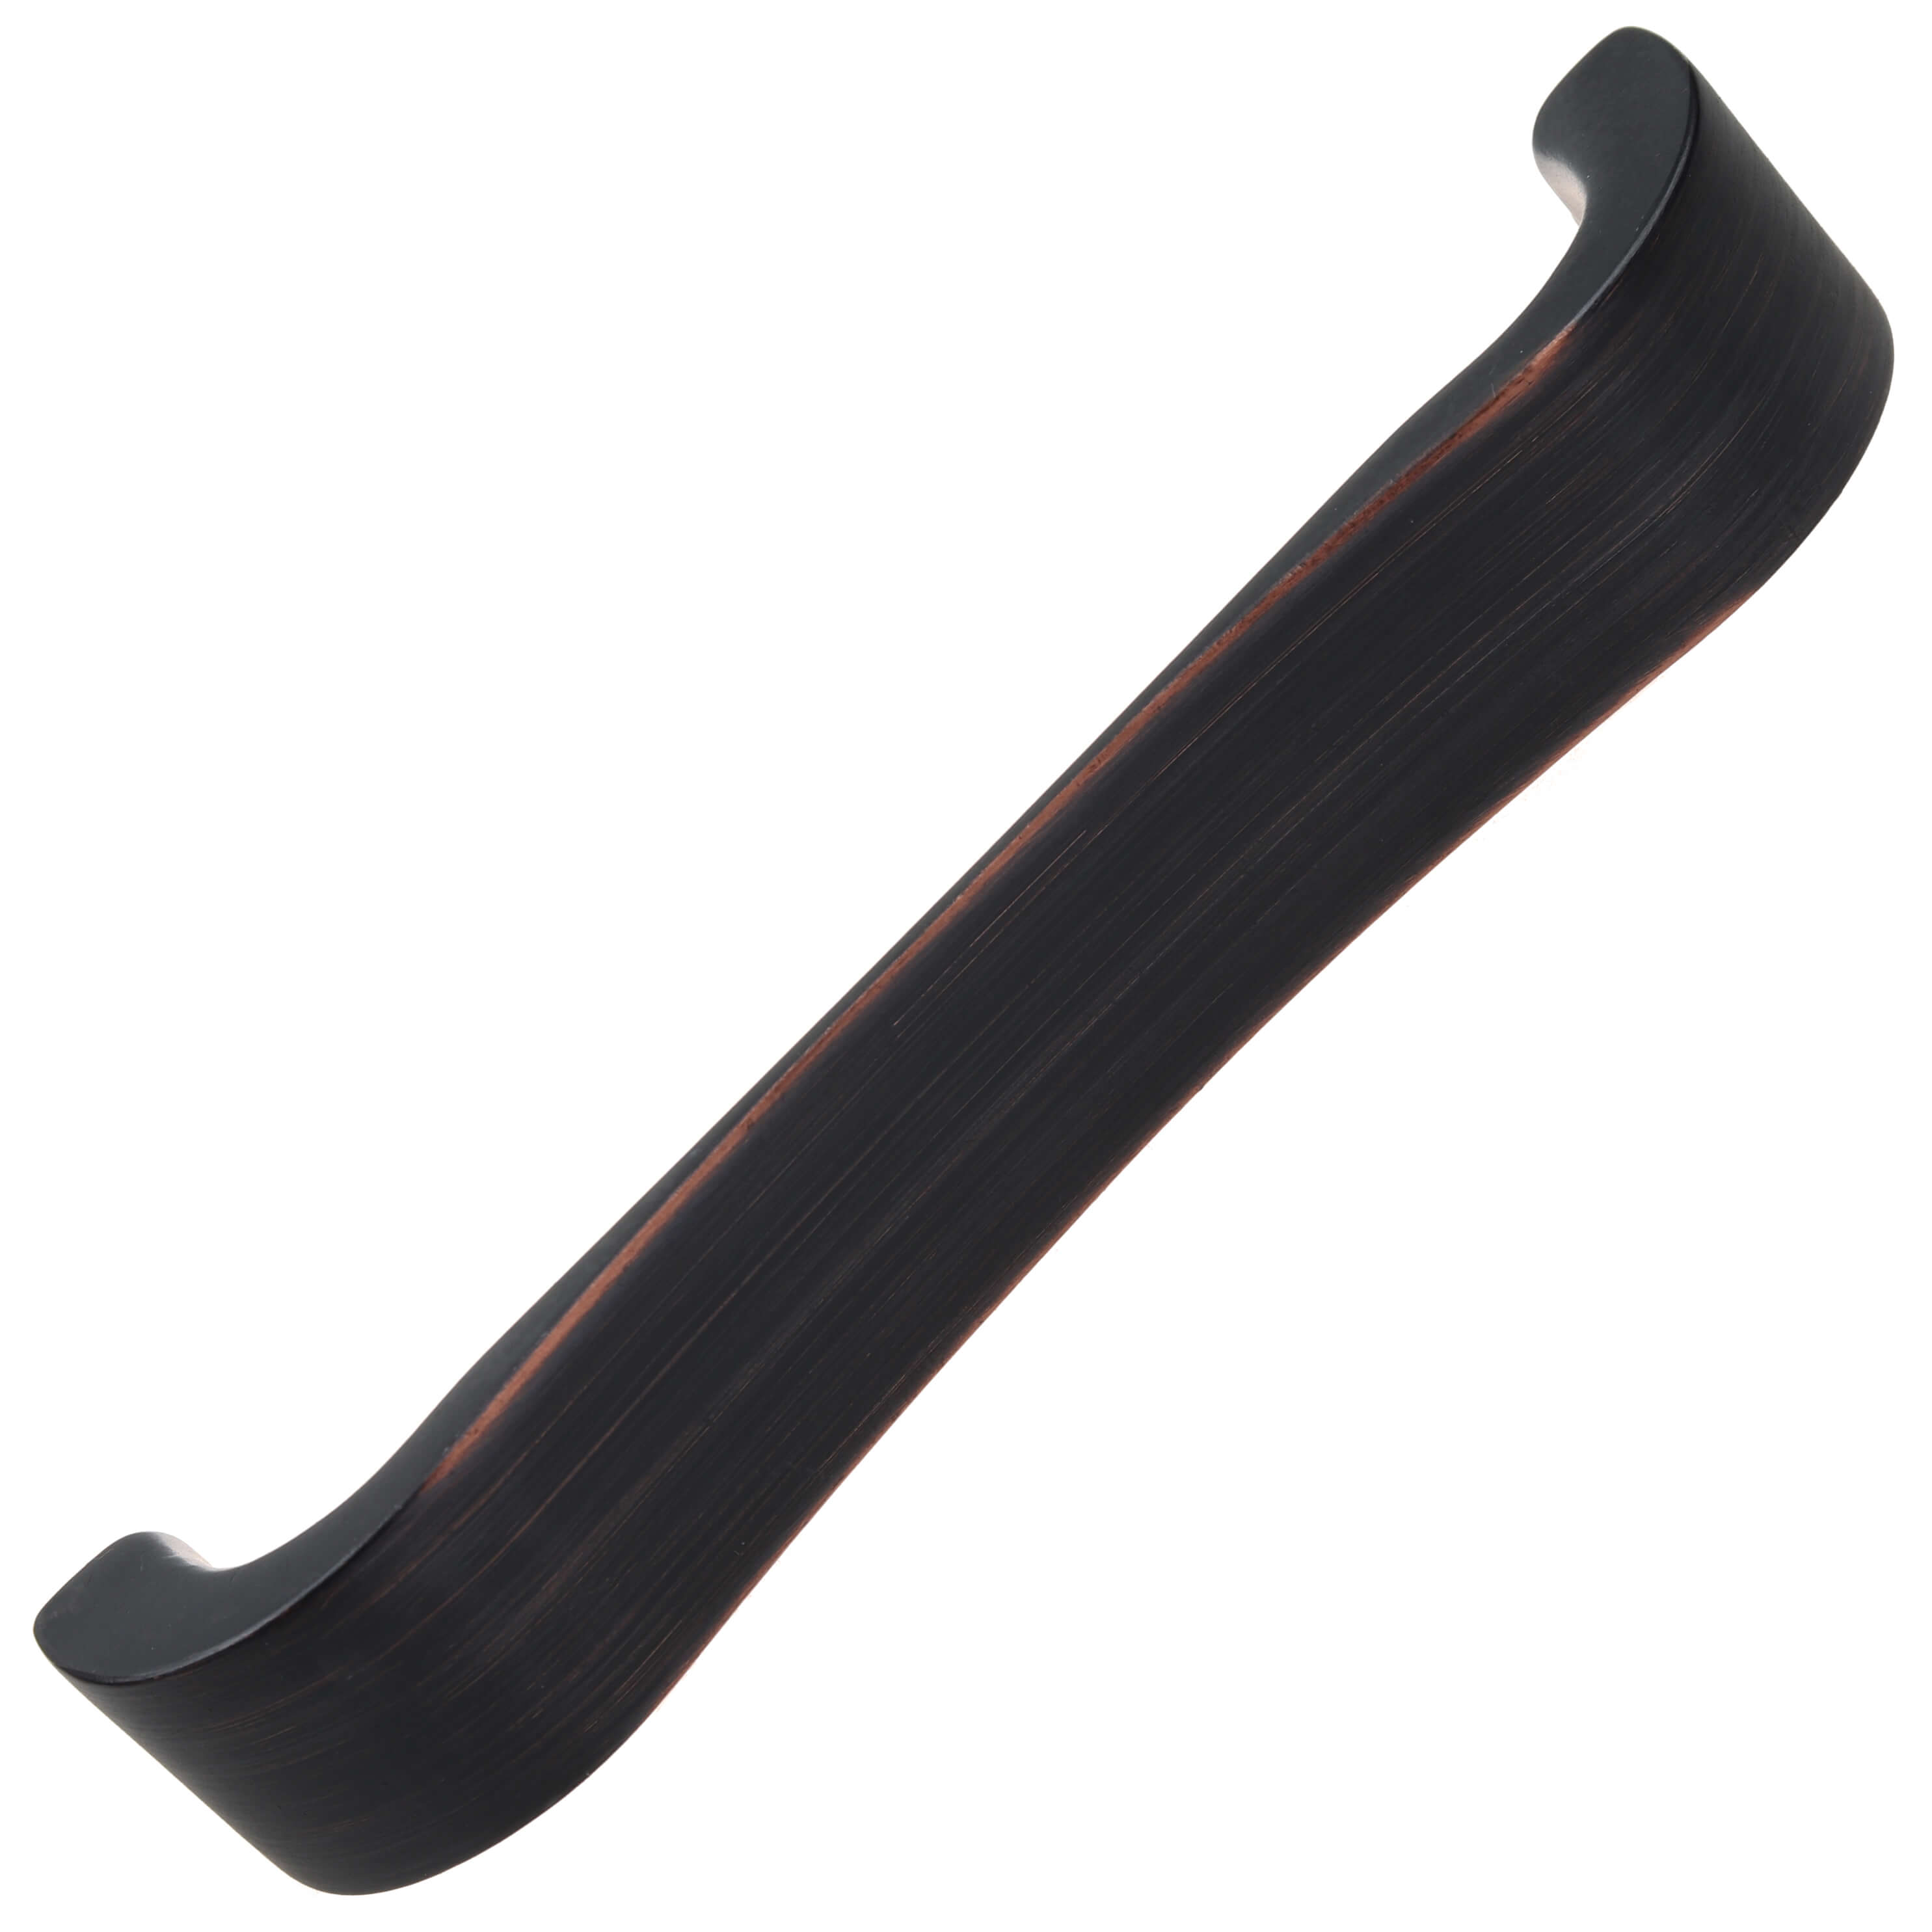 4-1/2 in. Center Smooth Curved Flat Cabinet Pull Handles, Oil Rubbed Bronze, Pack of 5 - image 1 of 3